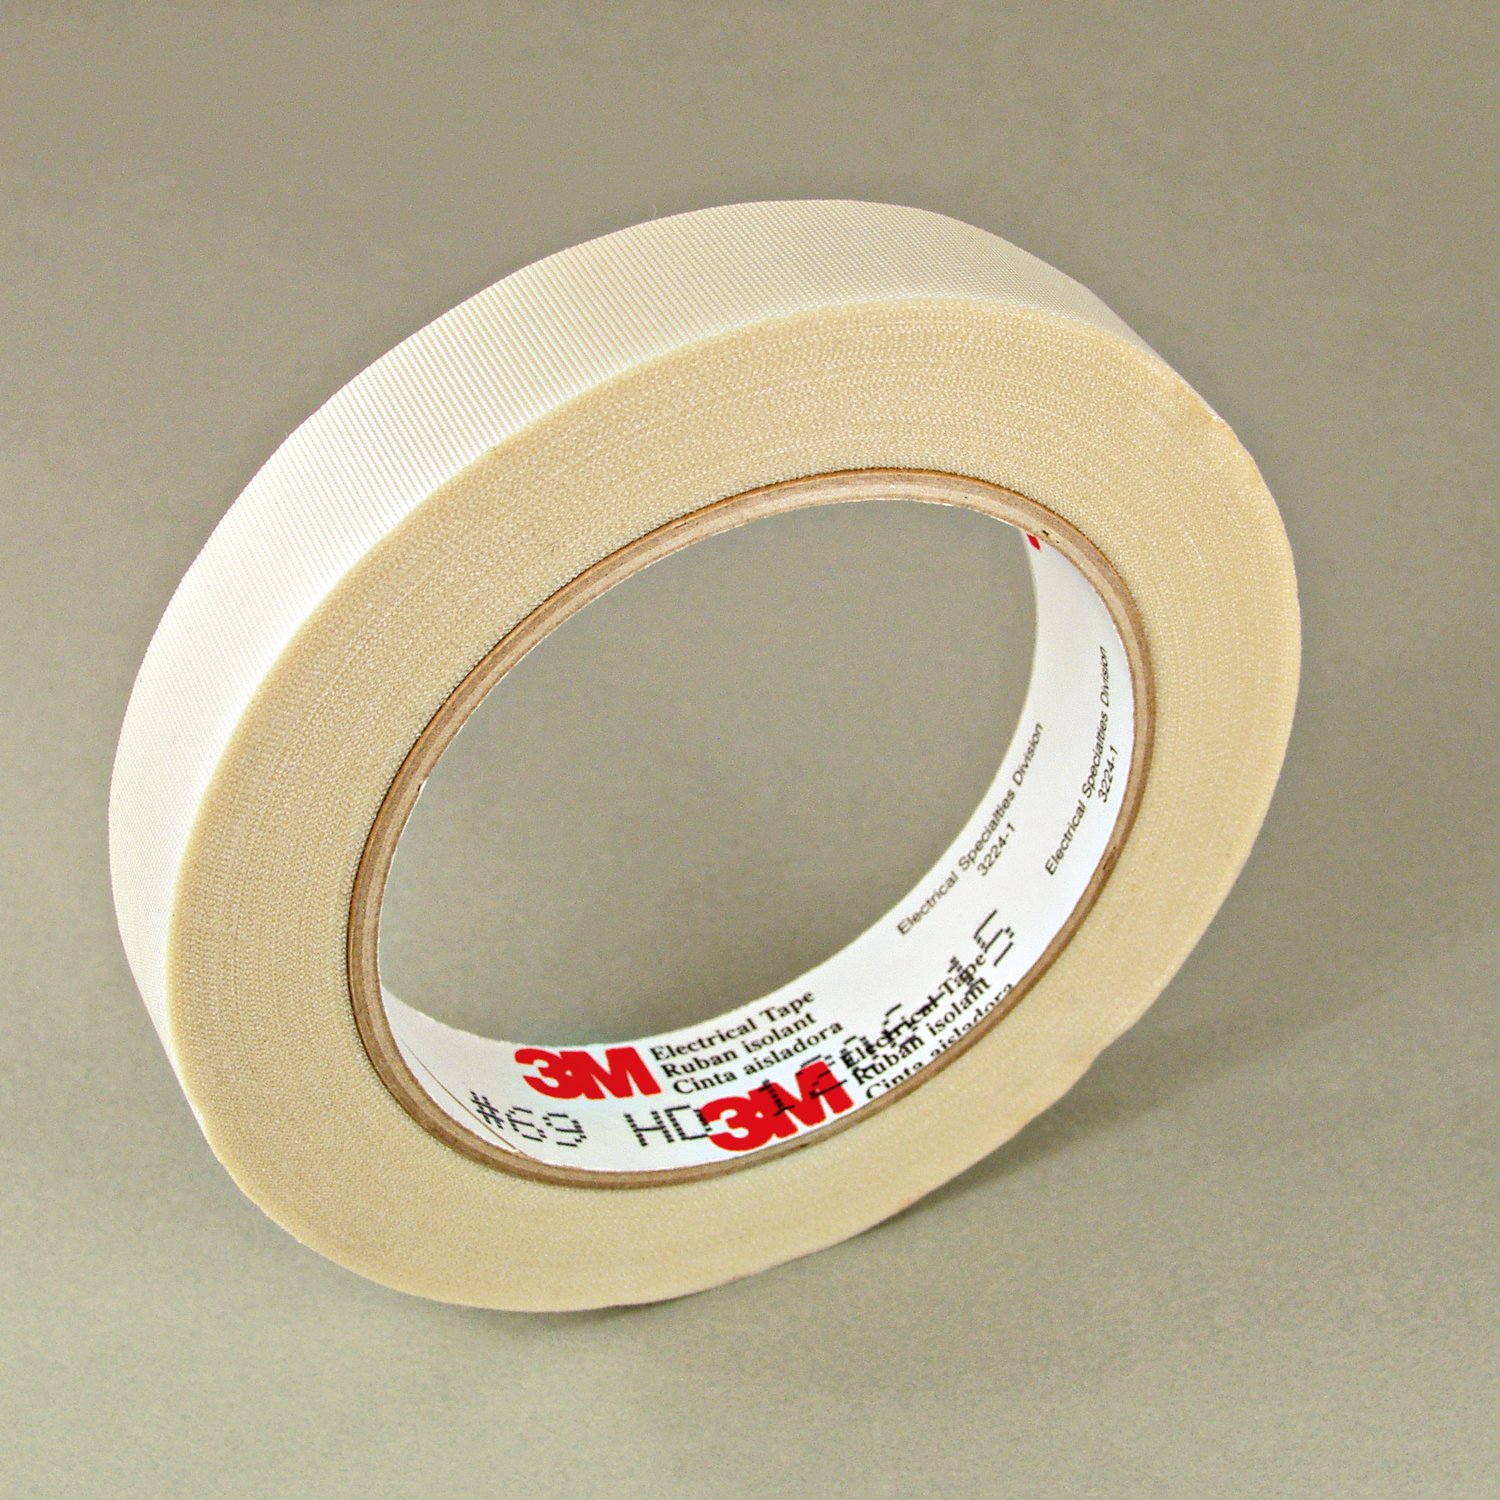 0.5 Width 6800 Dielectric Strength 1 mil 36 yd TapeCase BA Series-0.5 x 36yd Amber Polyimide/Acrylic Tape with Acrylic Adhesive Length 